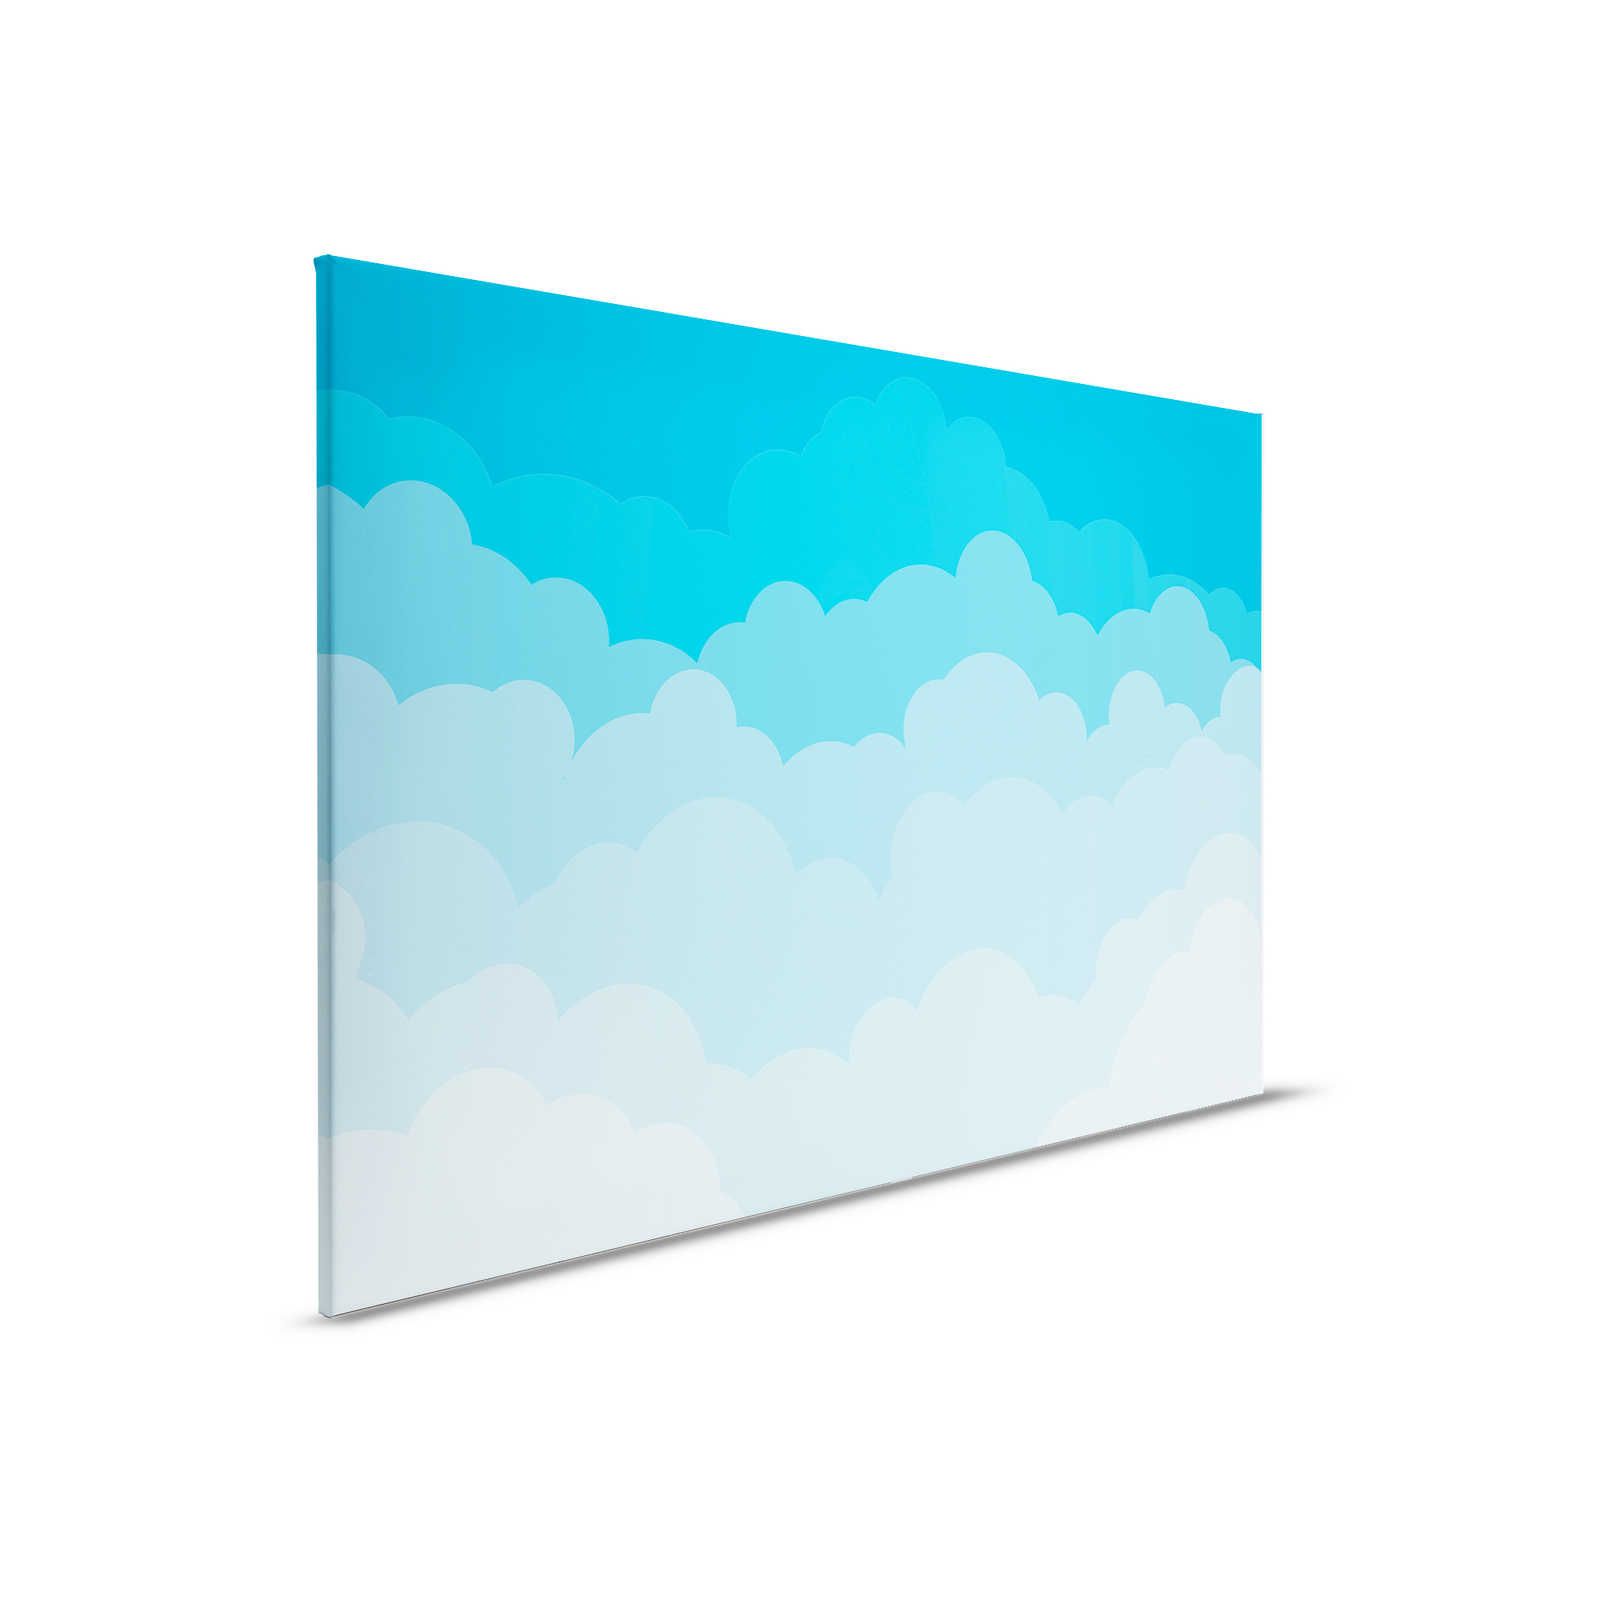         Canvas Sky with Clouds in Comic Style - 90 cm x 60 cm
    